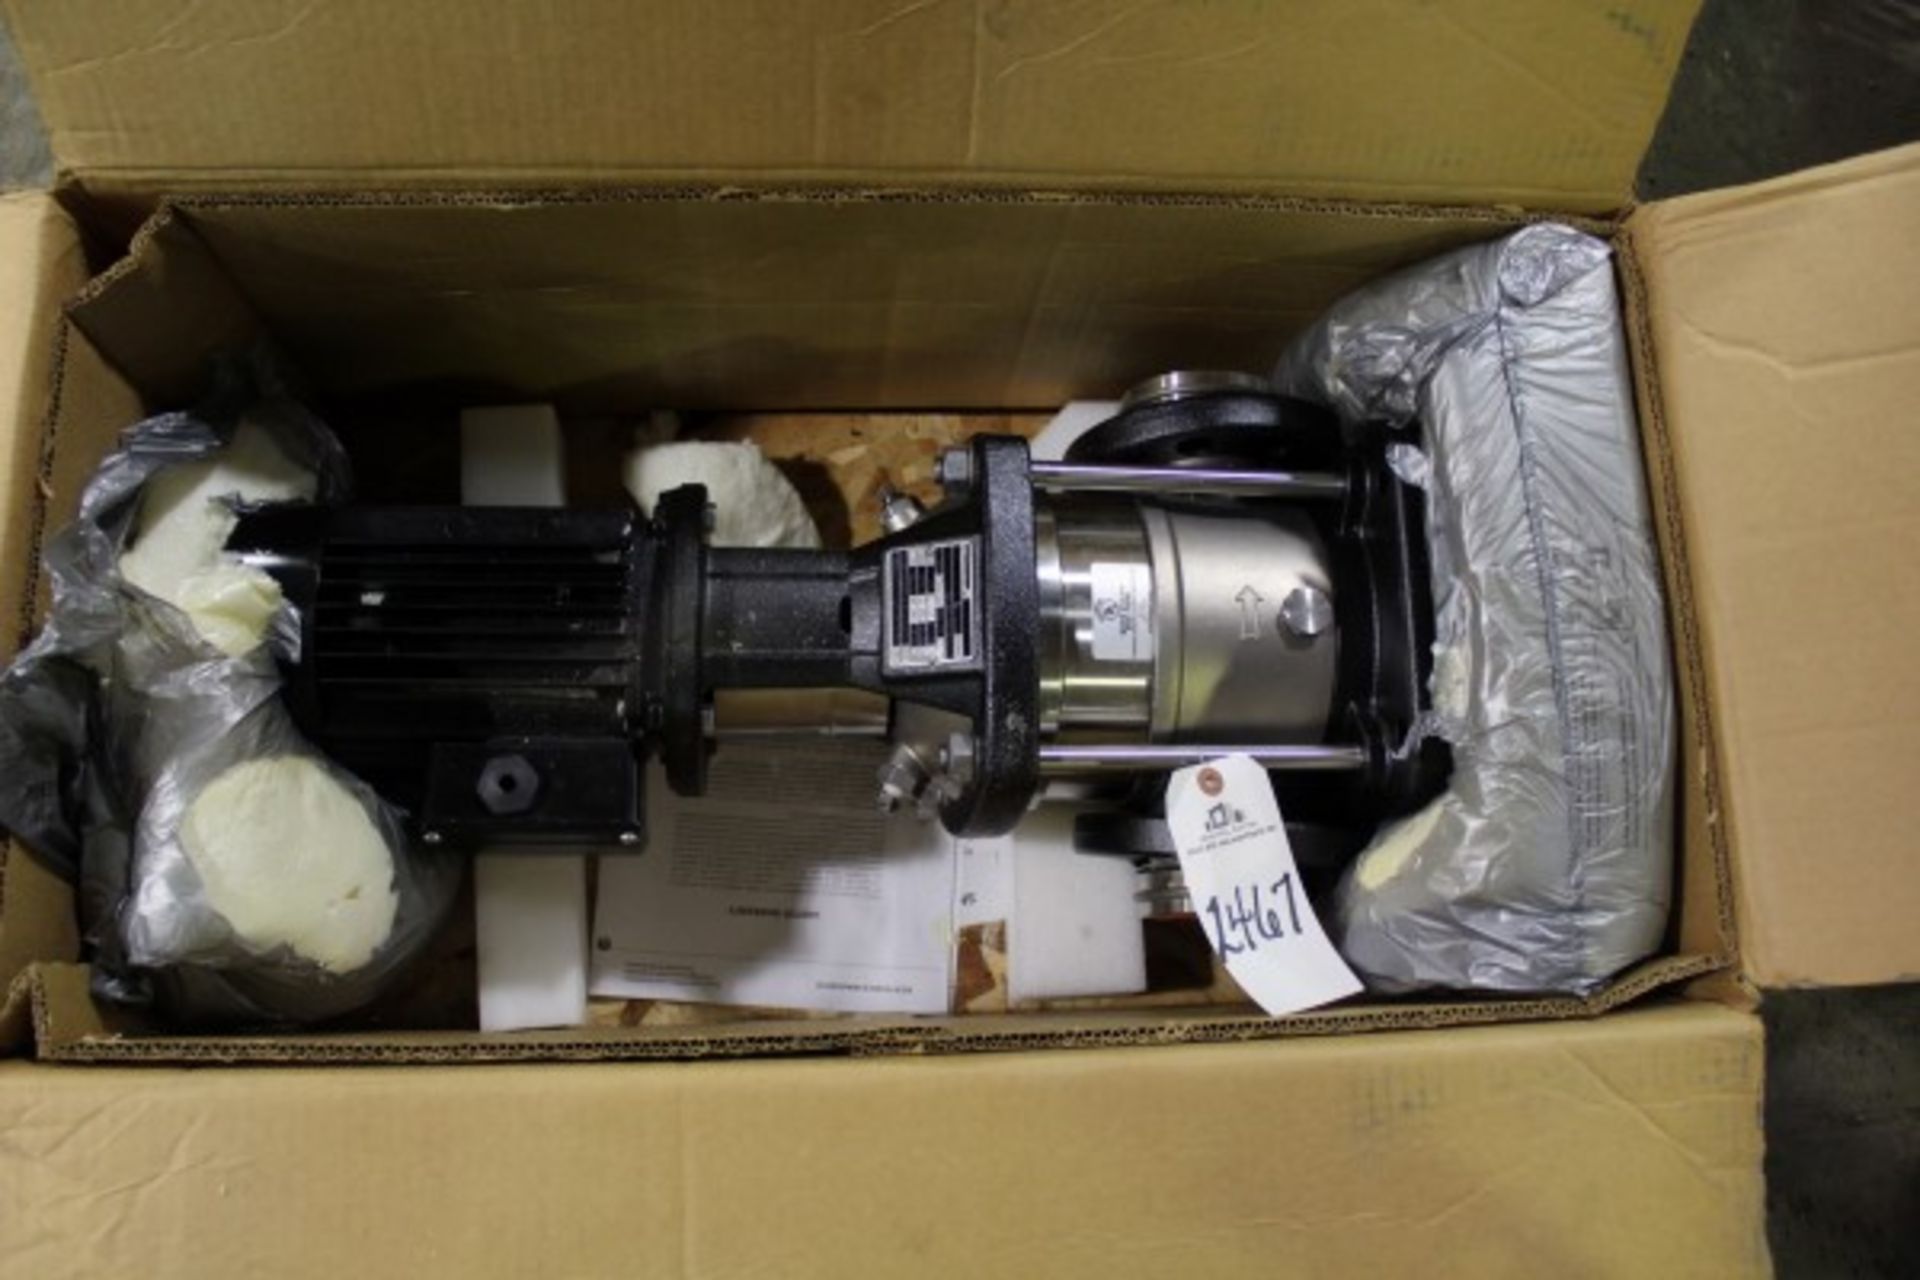 Grundfos Pump, Type CRN10-02-A-FGJ-G-E-HQQE | Seller to load for $10 per lot or buyers may remove